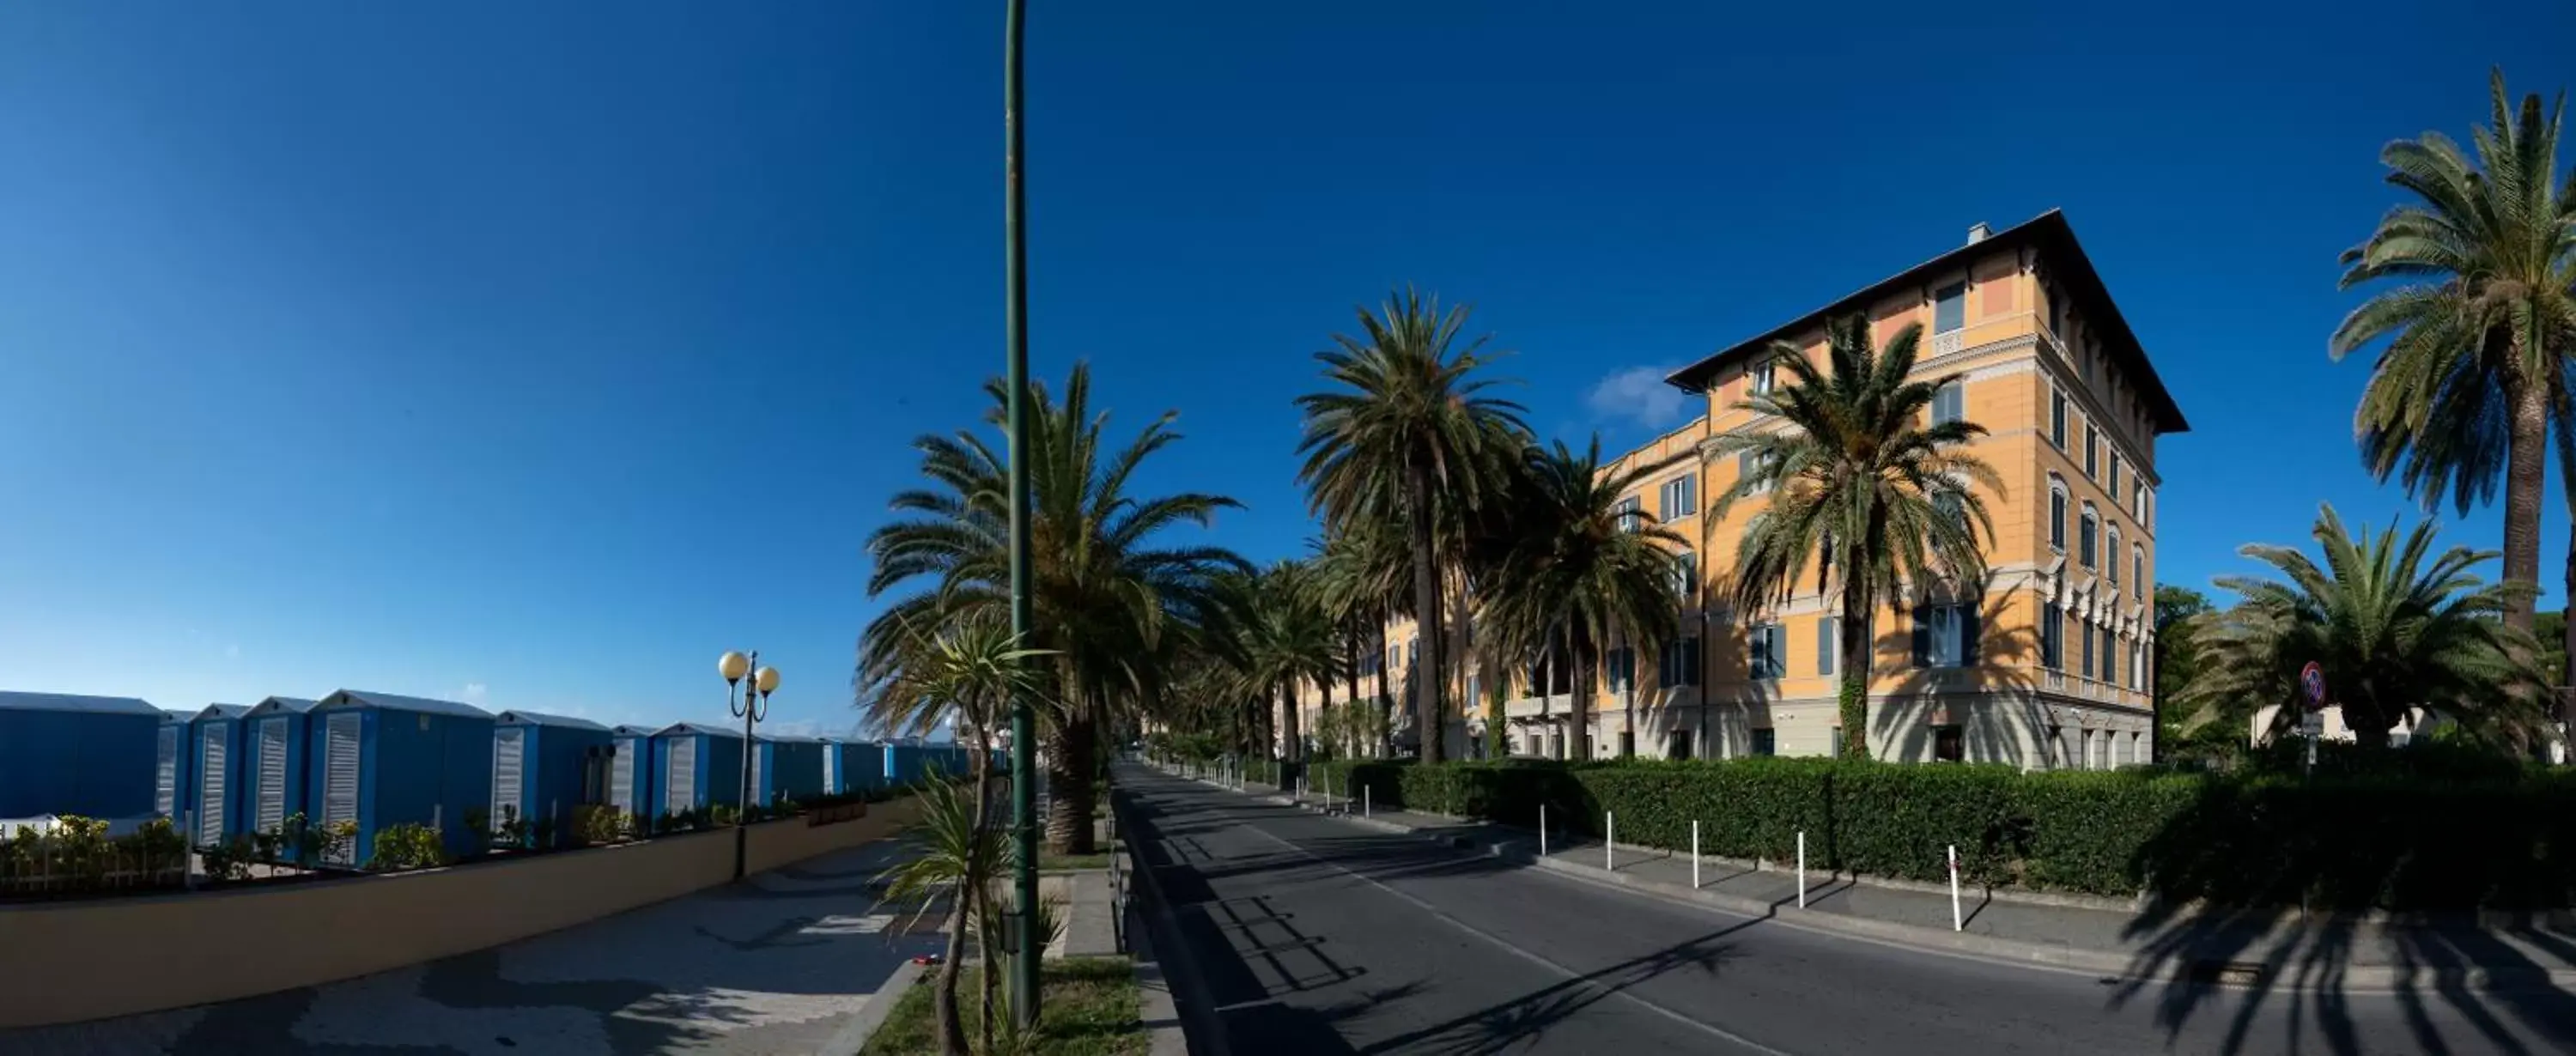 Property building in Grand Hotel Arenzano